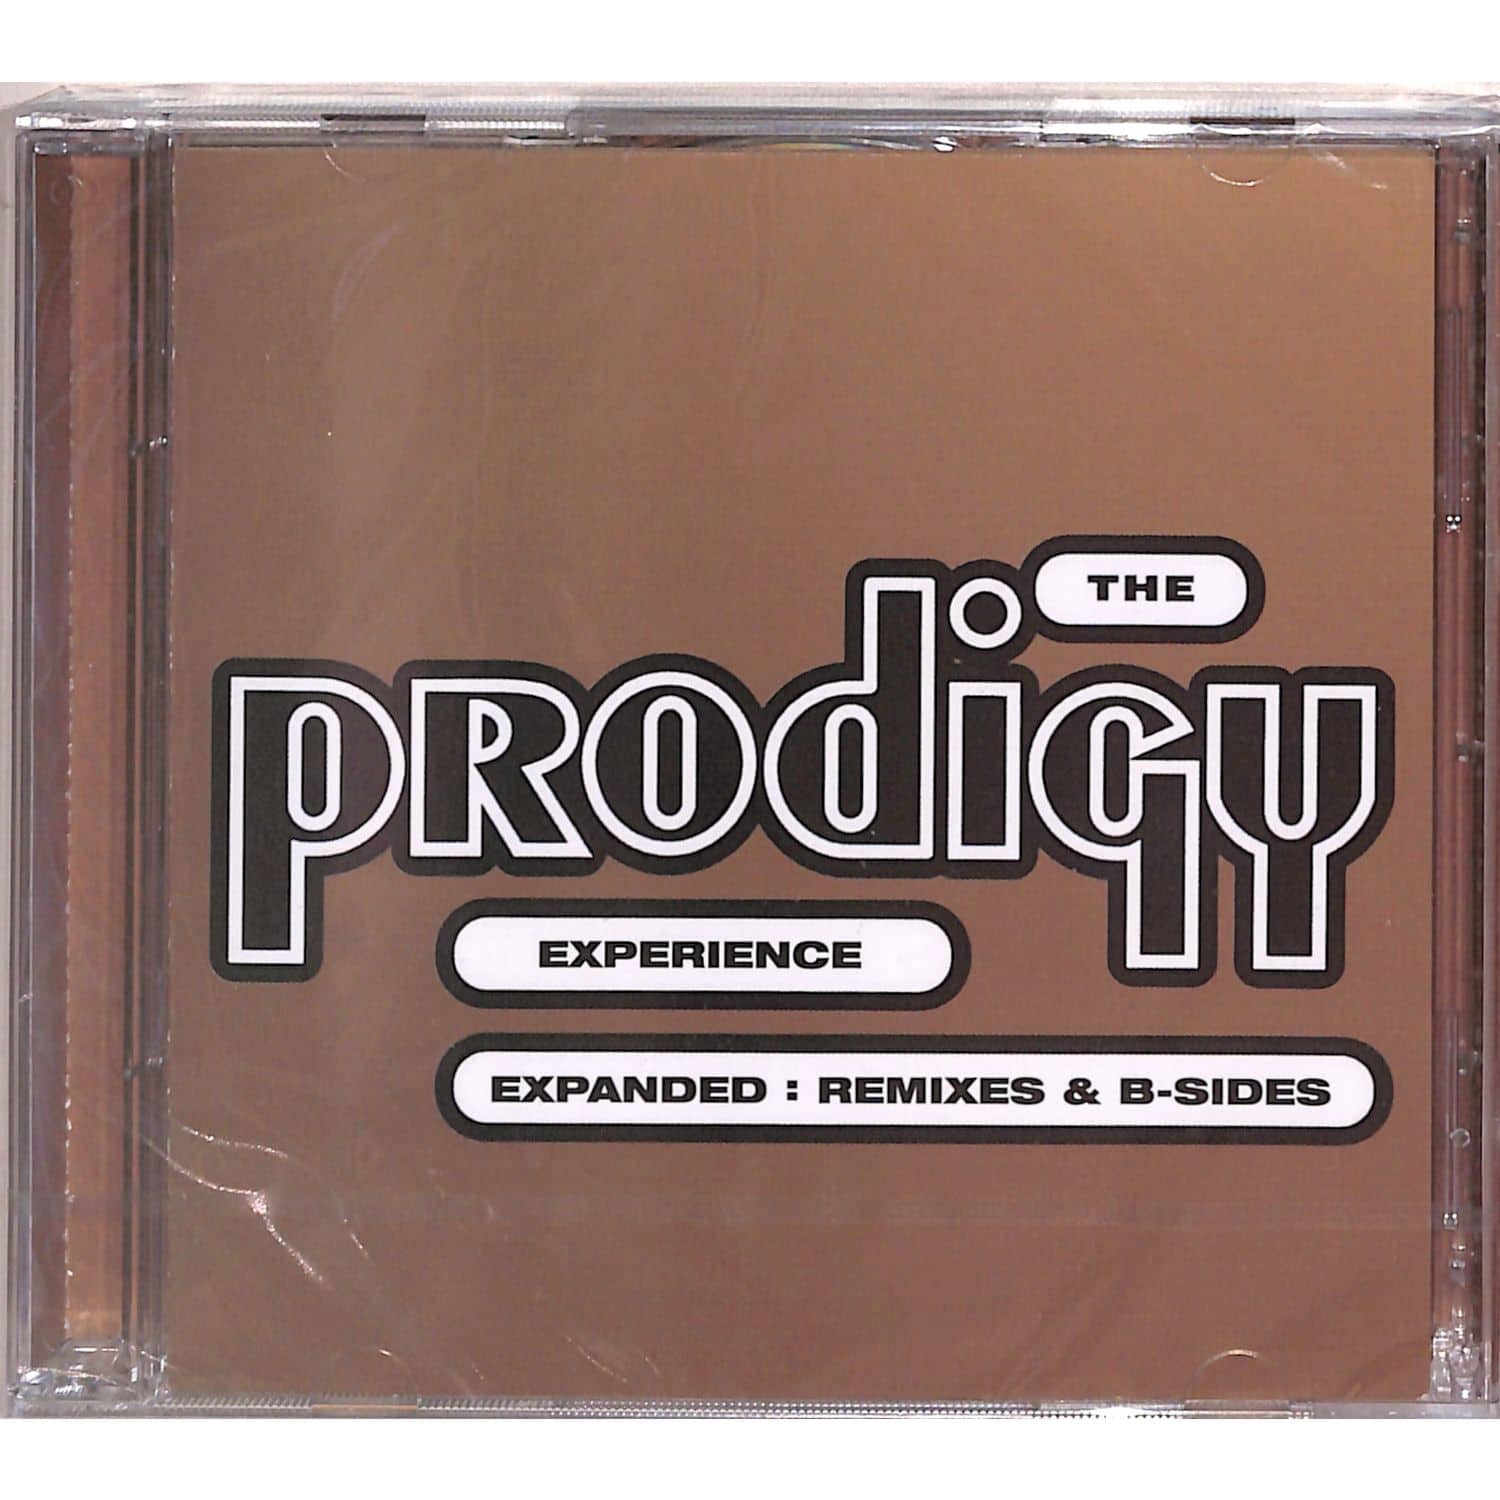 The Prodigy - EXPERIENCE EXPANDED - REMIXES & B-SIDES 